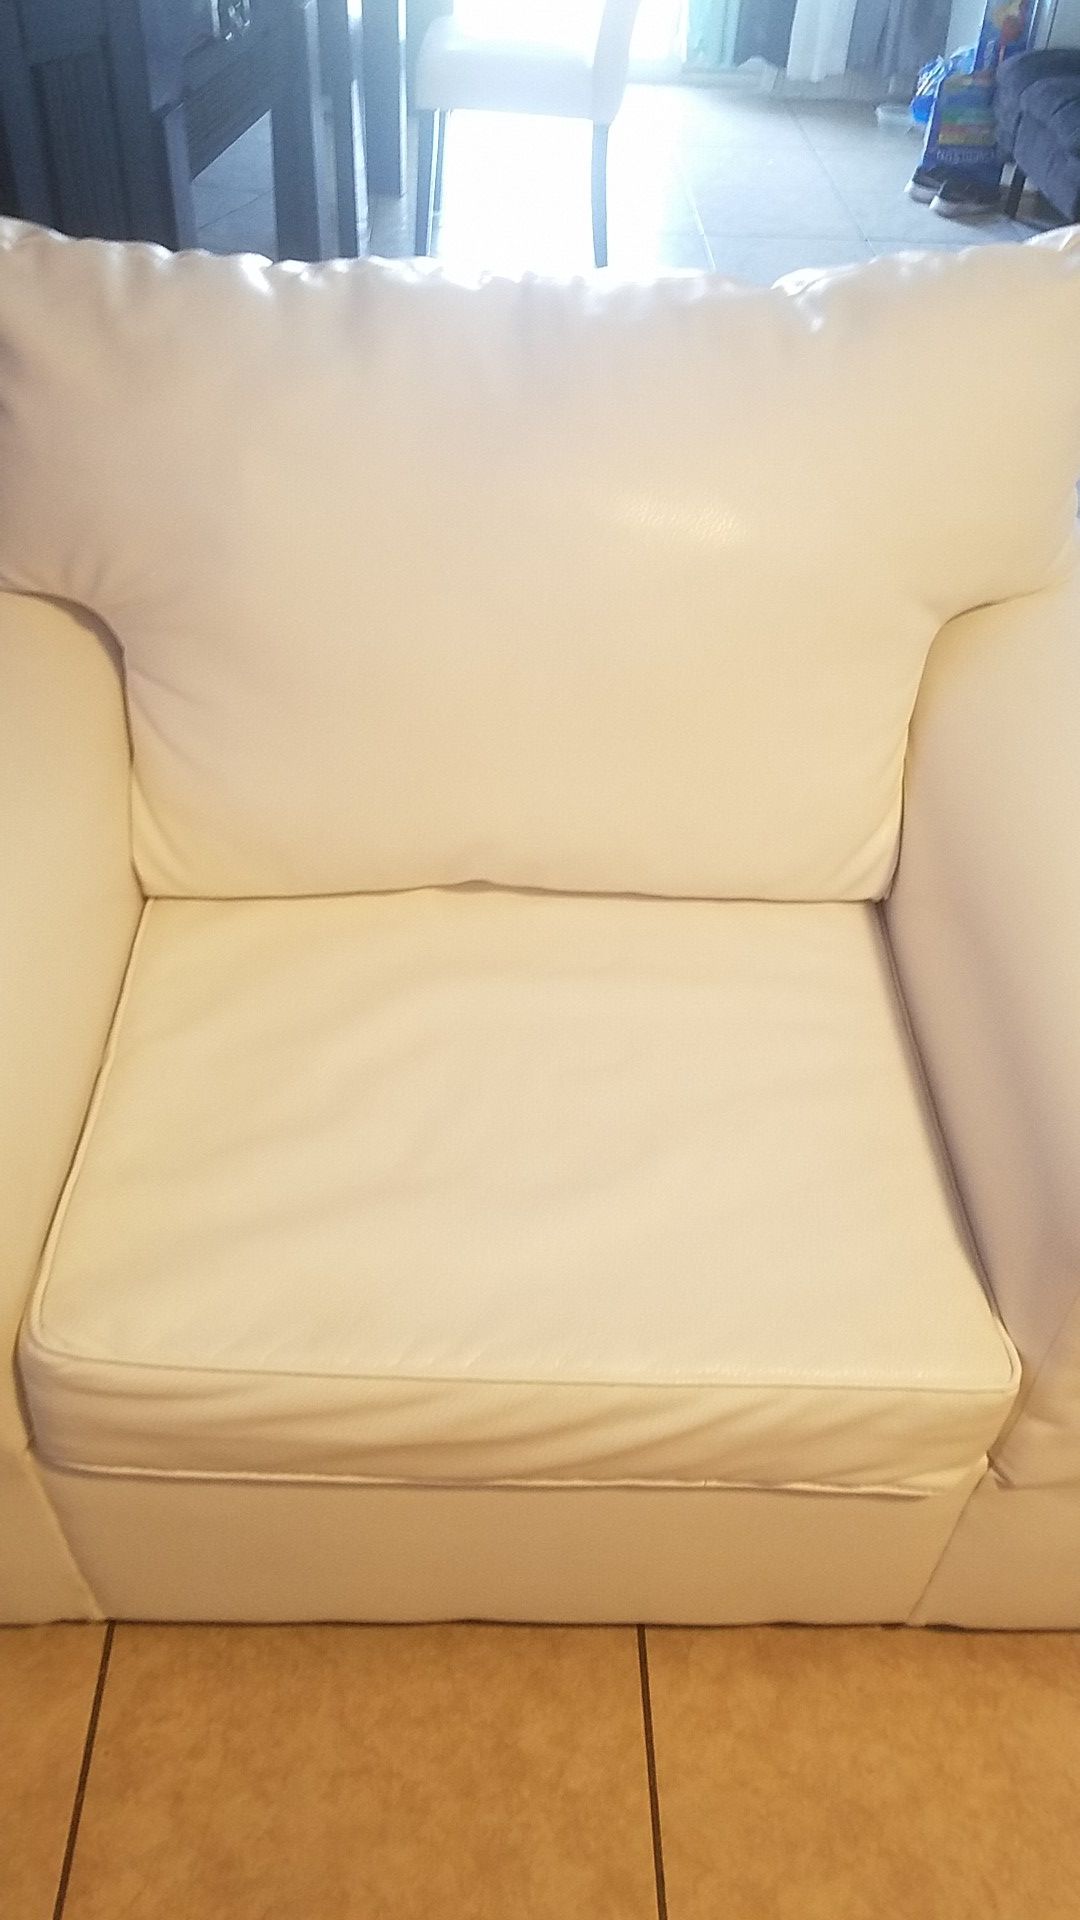 White clean leather couch